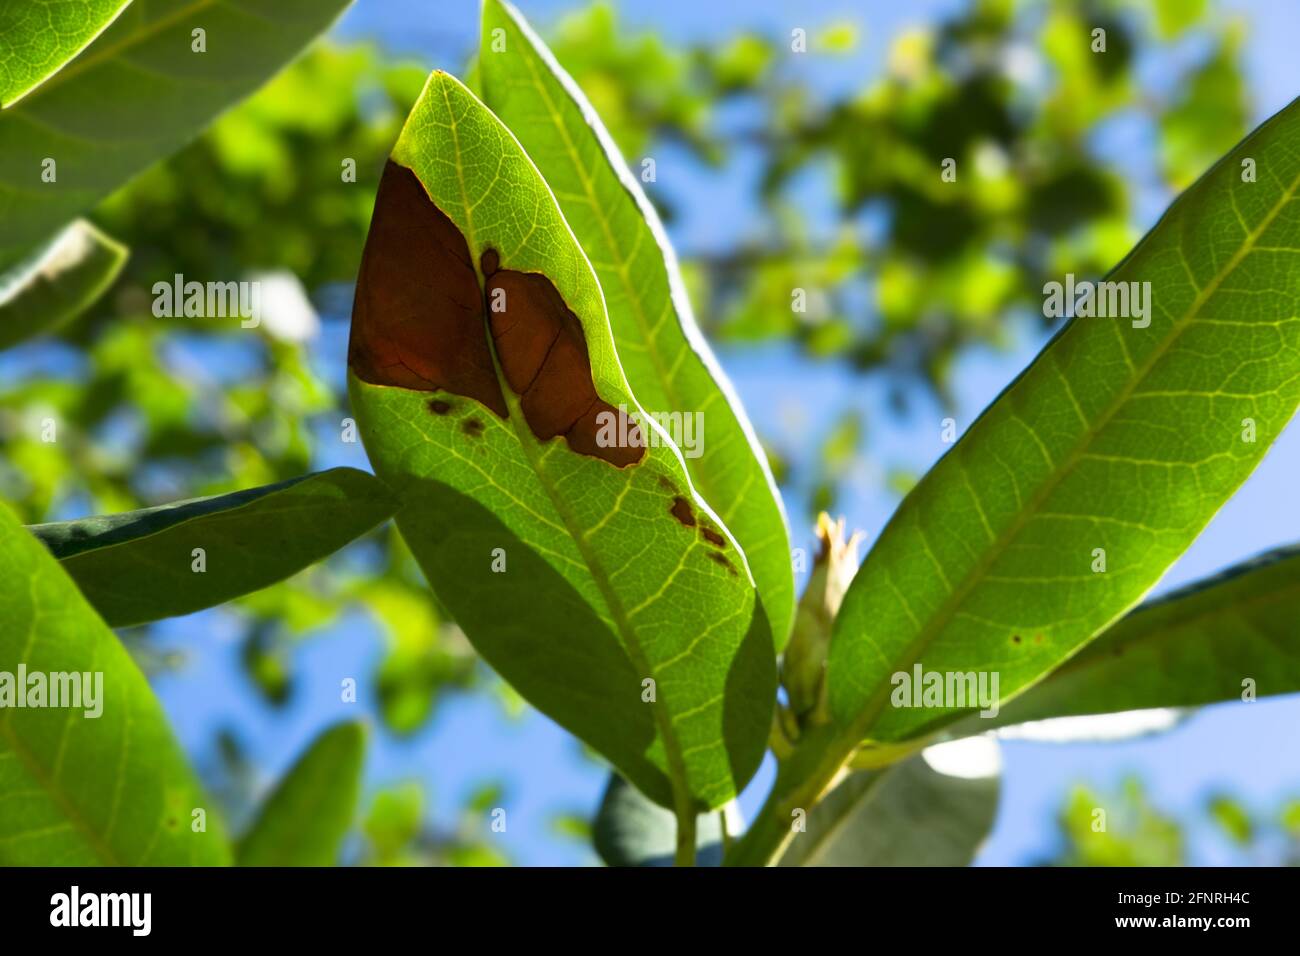 Leaves of rhododendron with brown spots caused by fungal diseases Stock Photo